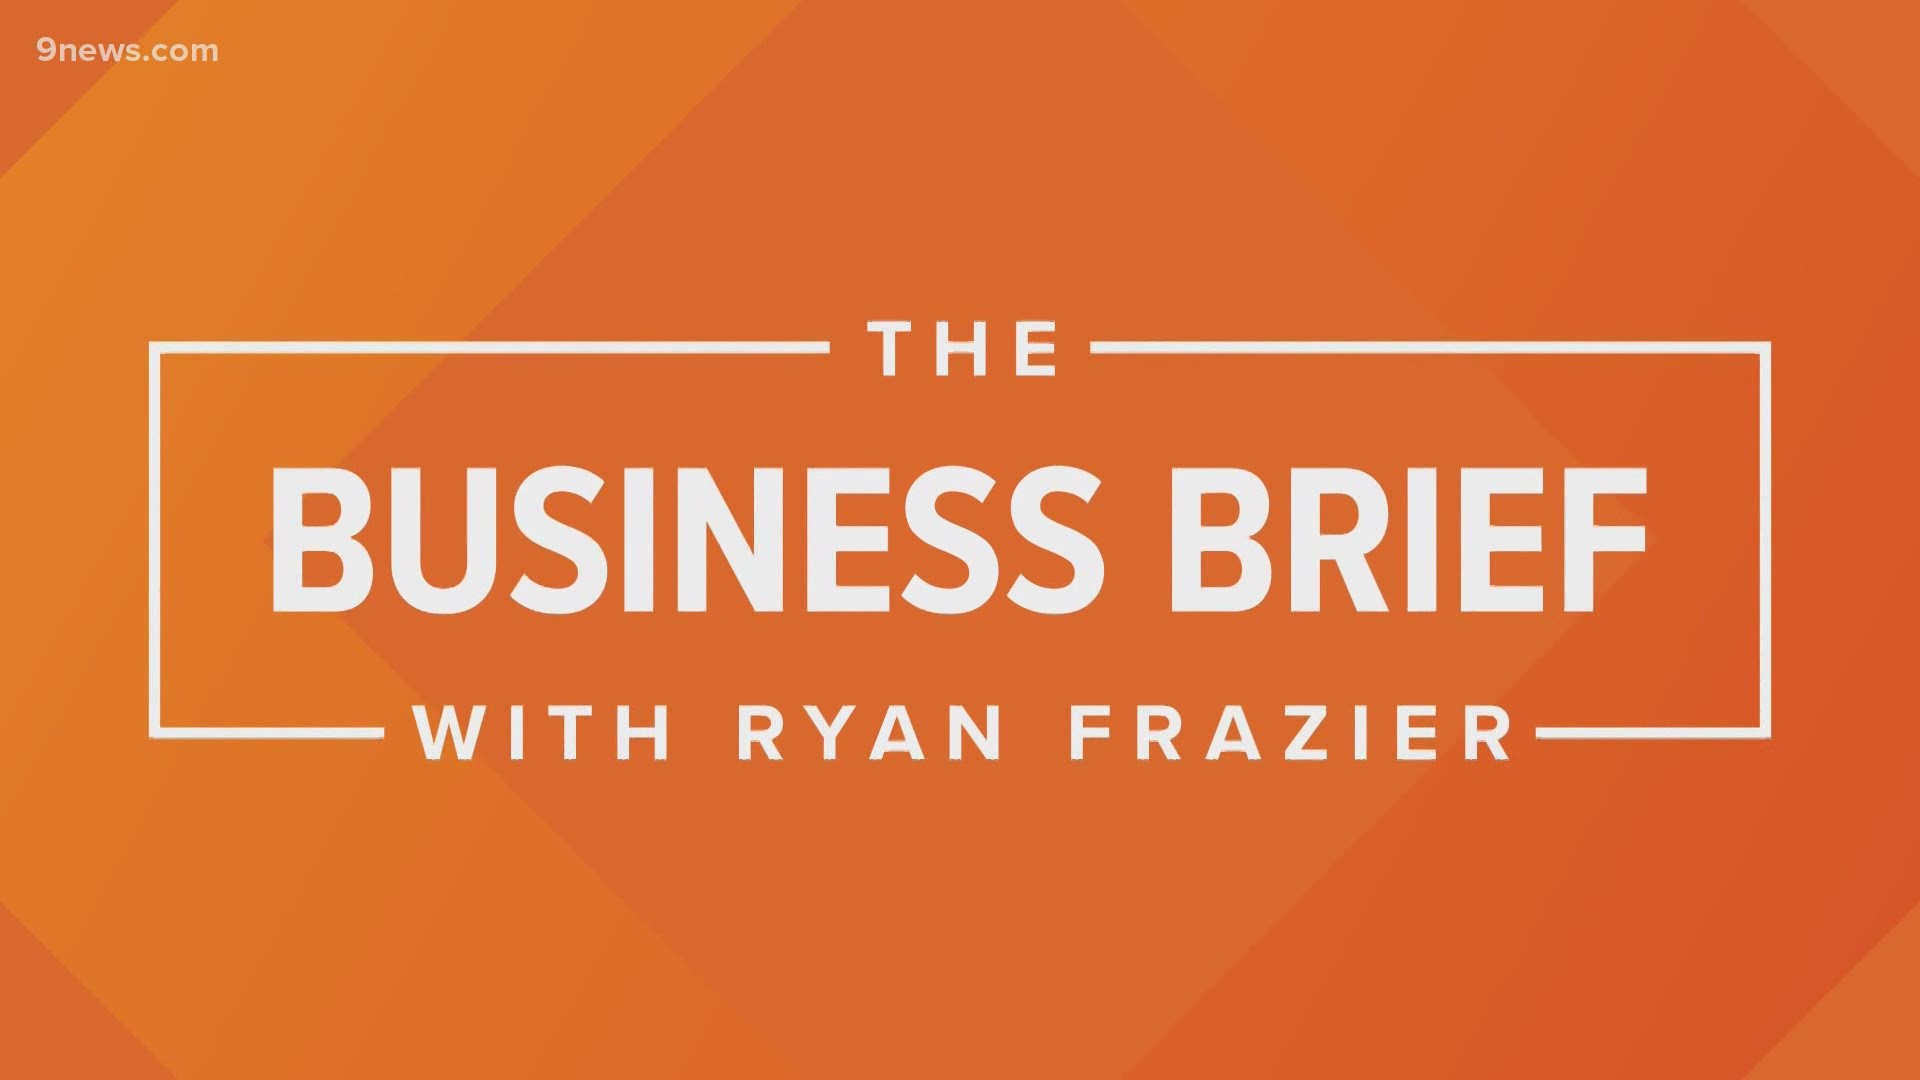 Business Analyst Ryan Frazier breaks down the latest business news for Colorado.